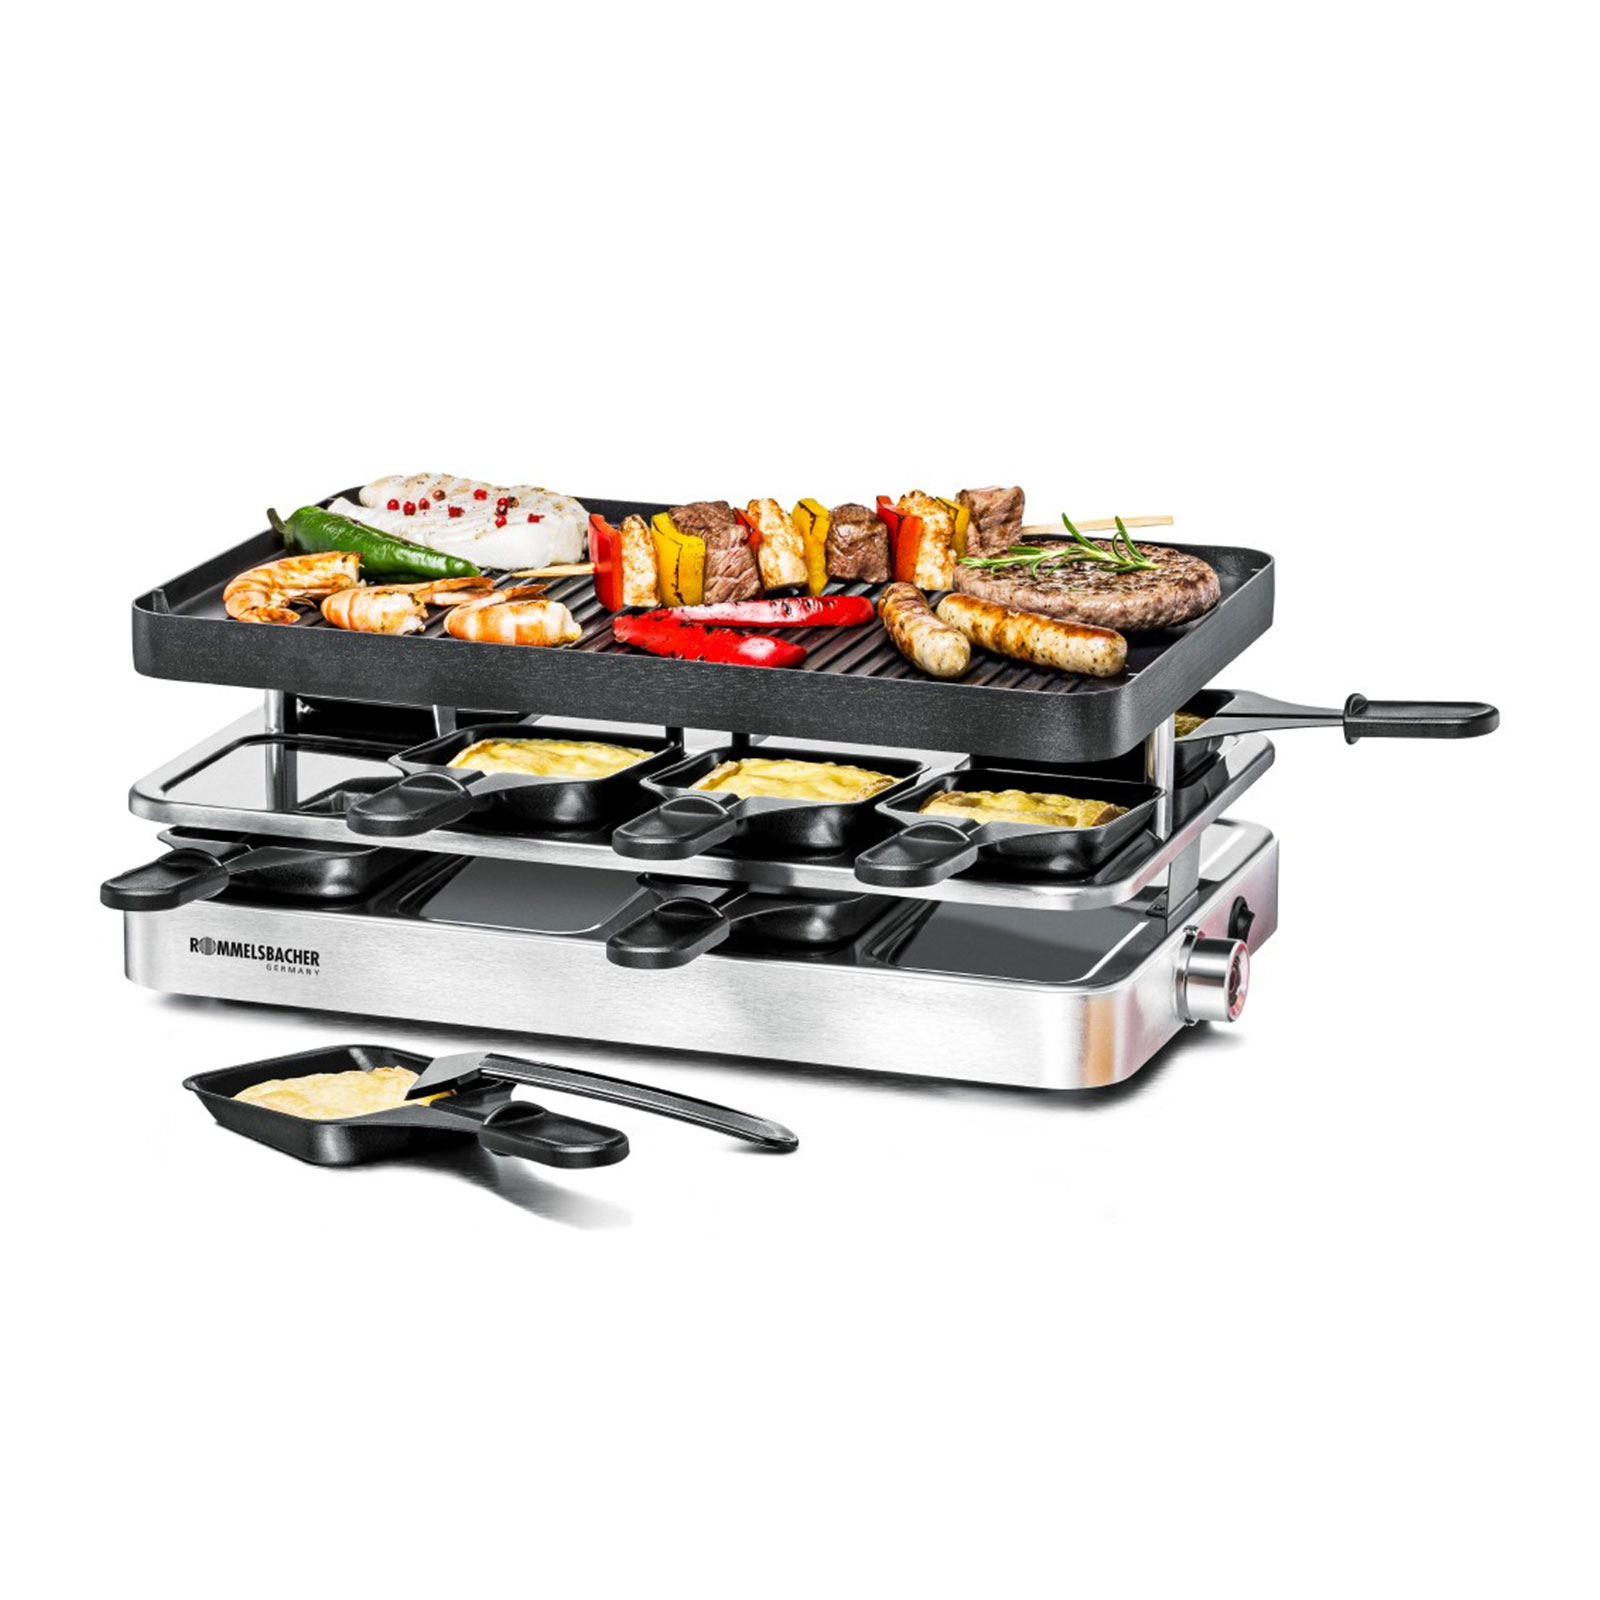 Rommelsbacher RC 1400 Raclette-Grill mit Wendeplatte